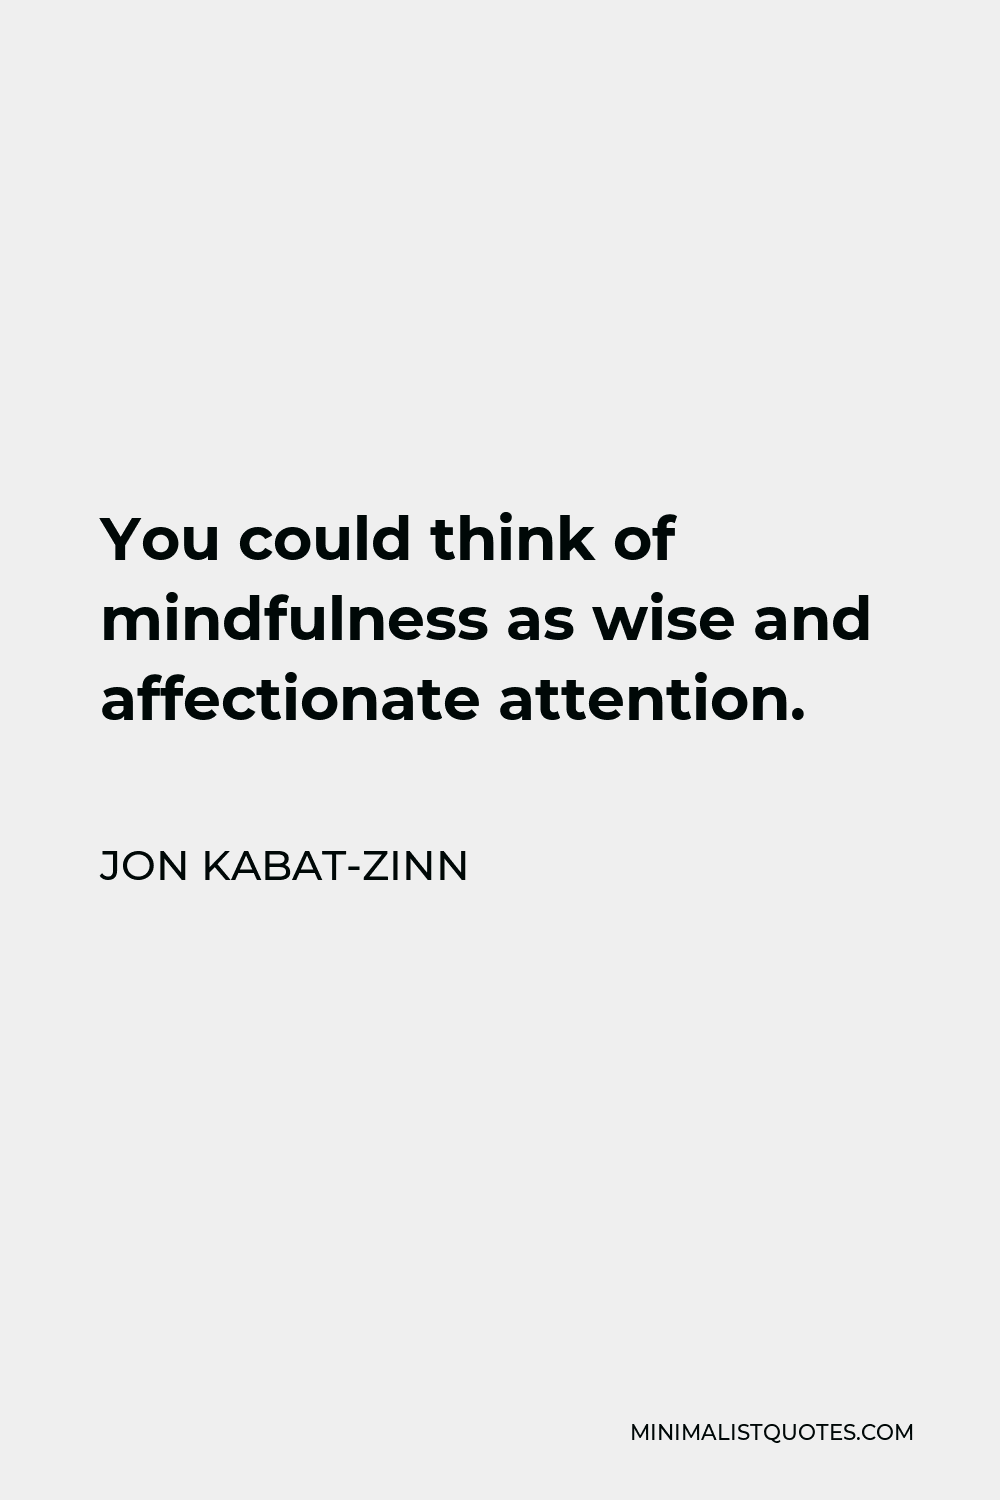 Jon Kabat-Zinn Quote - You could think of mindfulness as wise and affectionate attention.